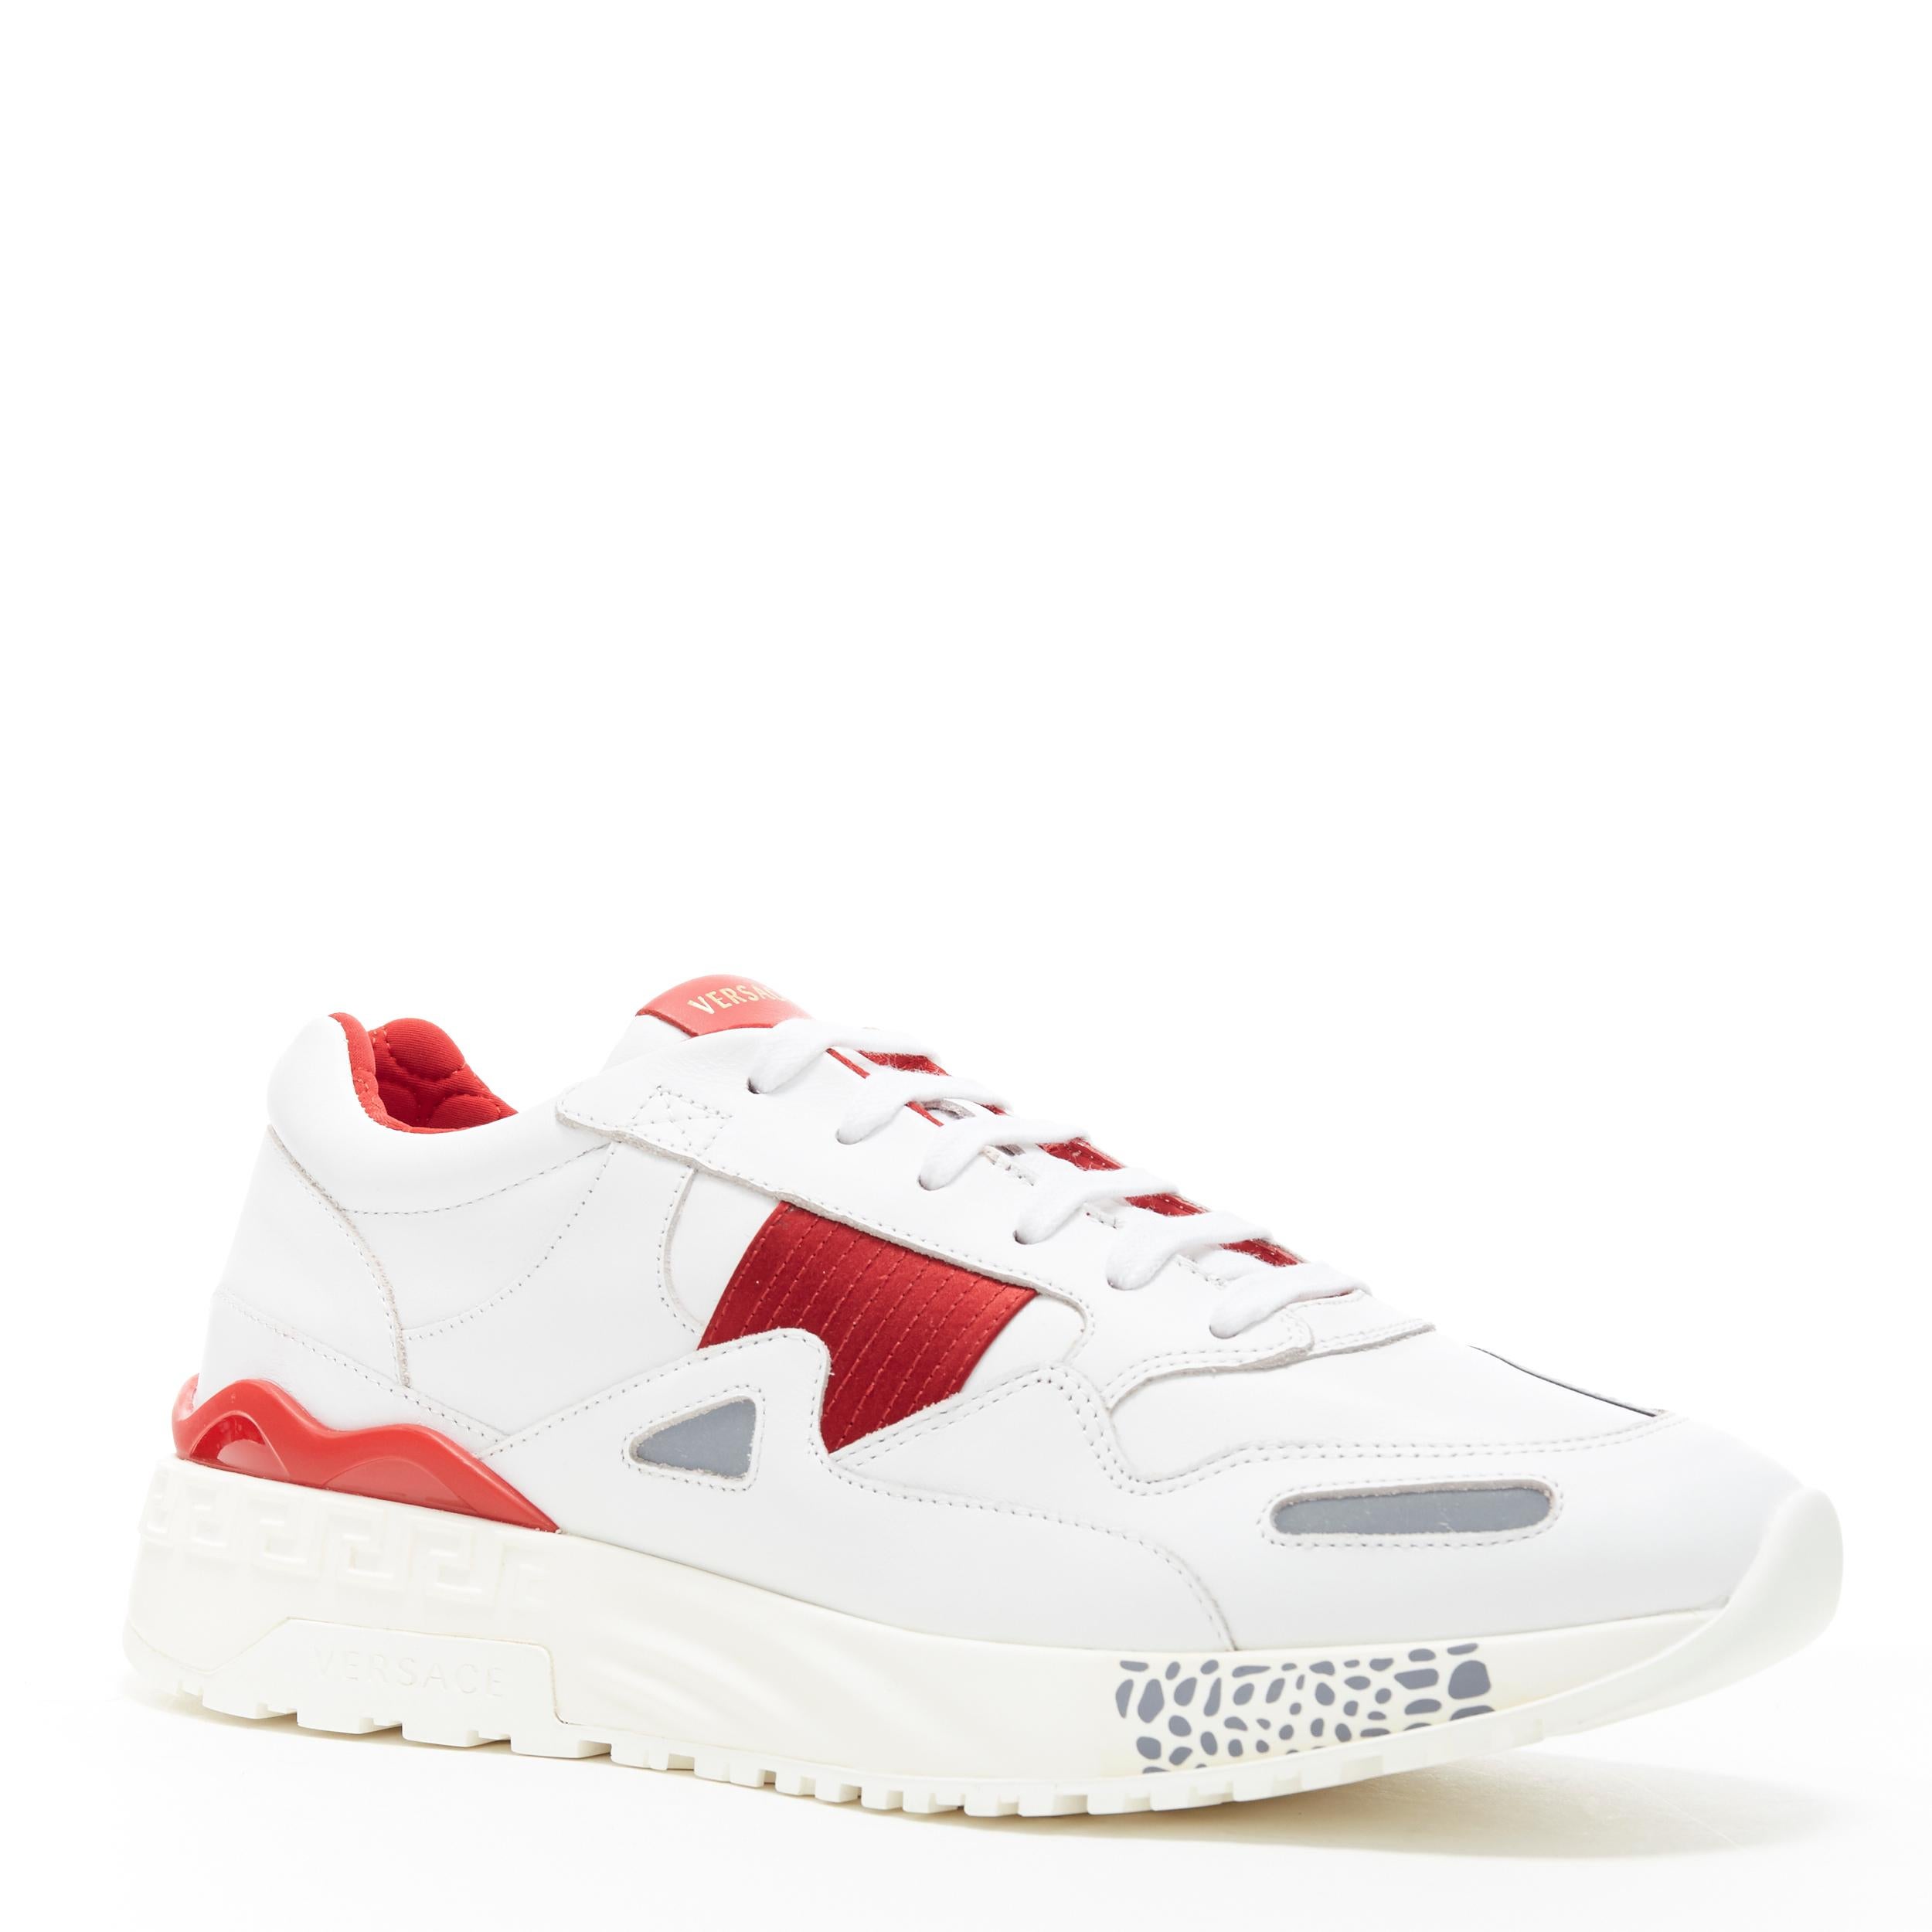 new VERSACE Achilles white lamb leather red satin chunky sole dad sneakers EU43
Brand: Versace
Designer: Donatella Versace
Model Name / Style: Achilles sneakers
Material: Leather; lamb leather
Color: White; red detail
Pattern: Solid
Closure: Lace